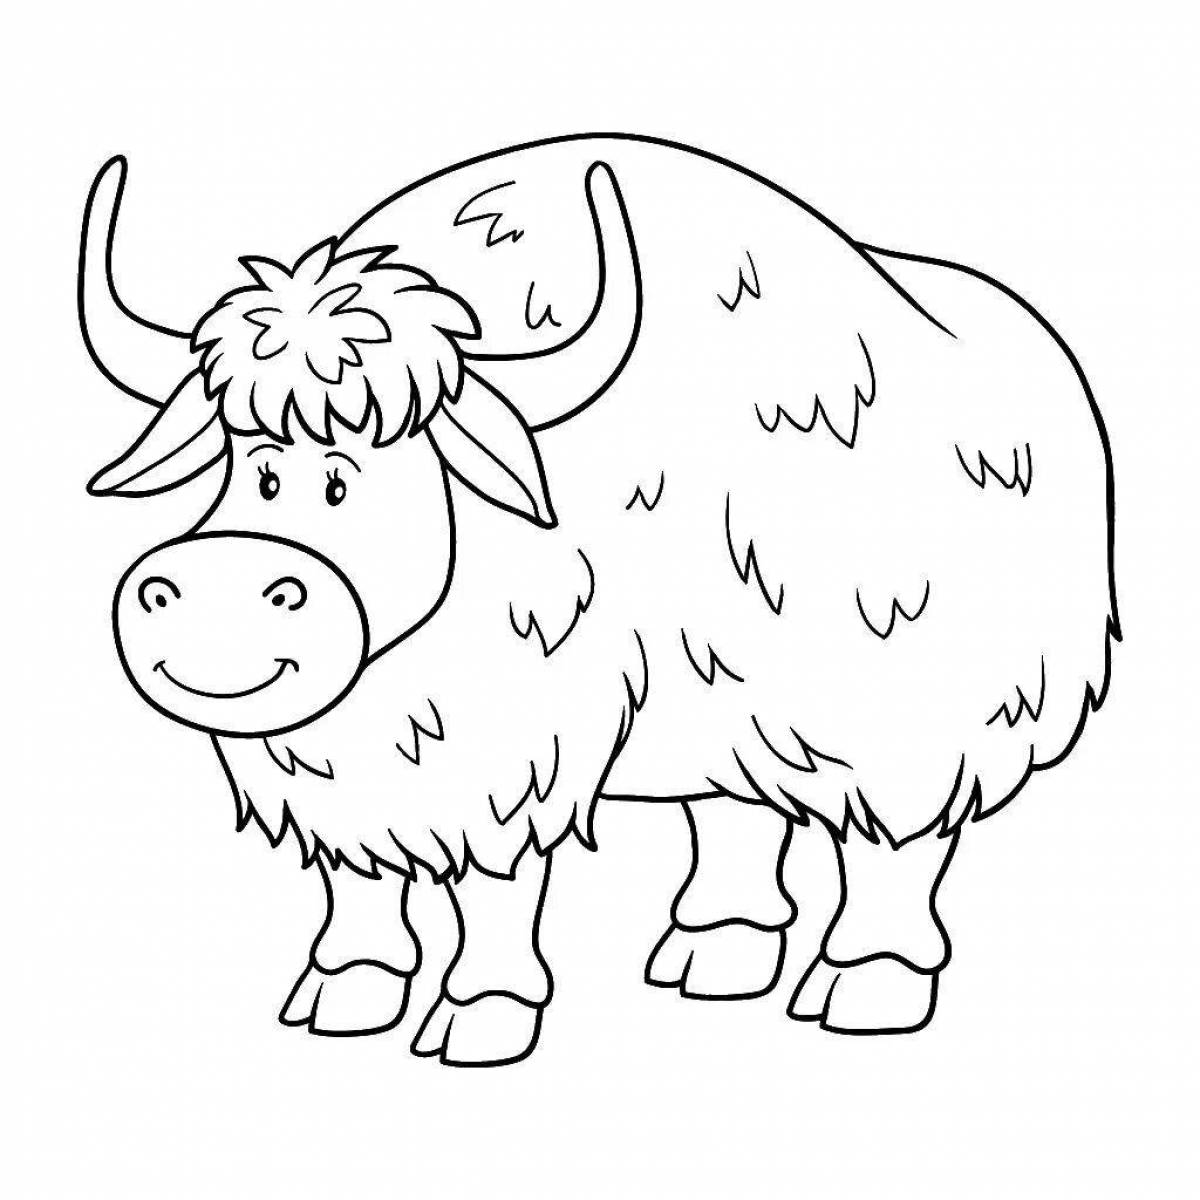 Colorful yak coloring page